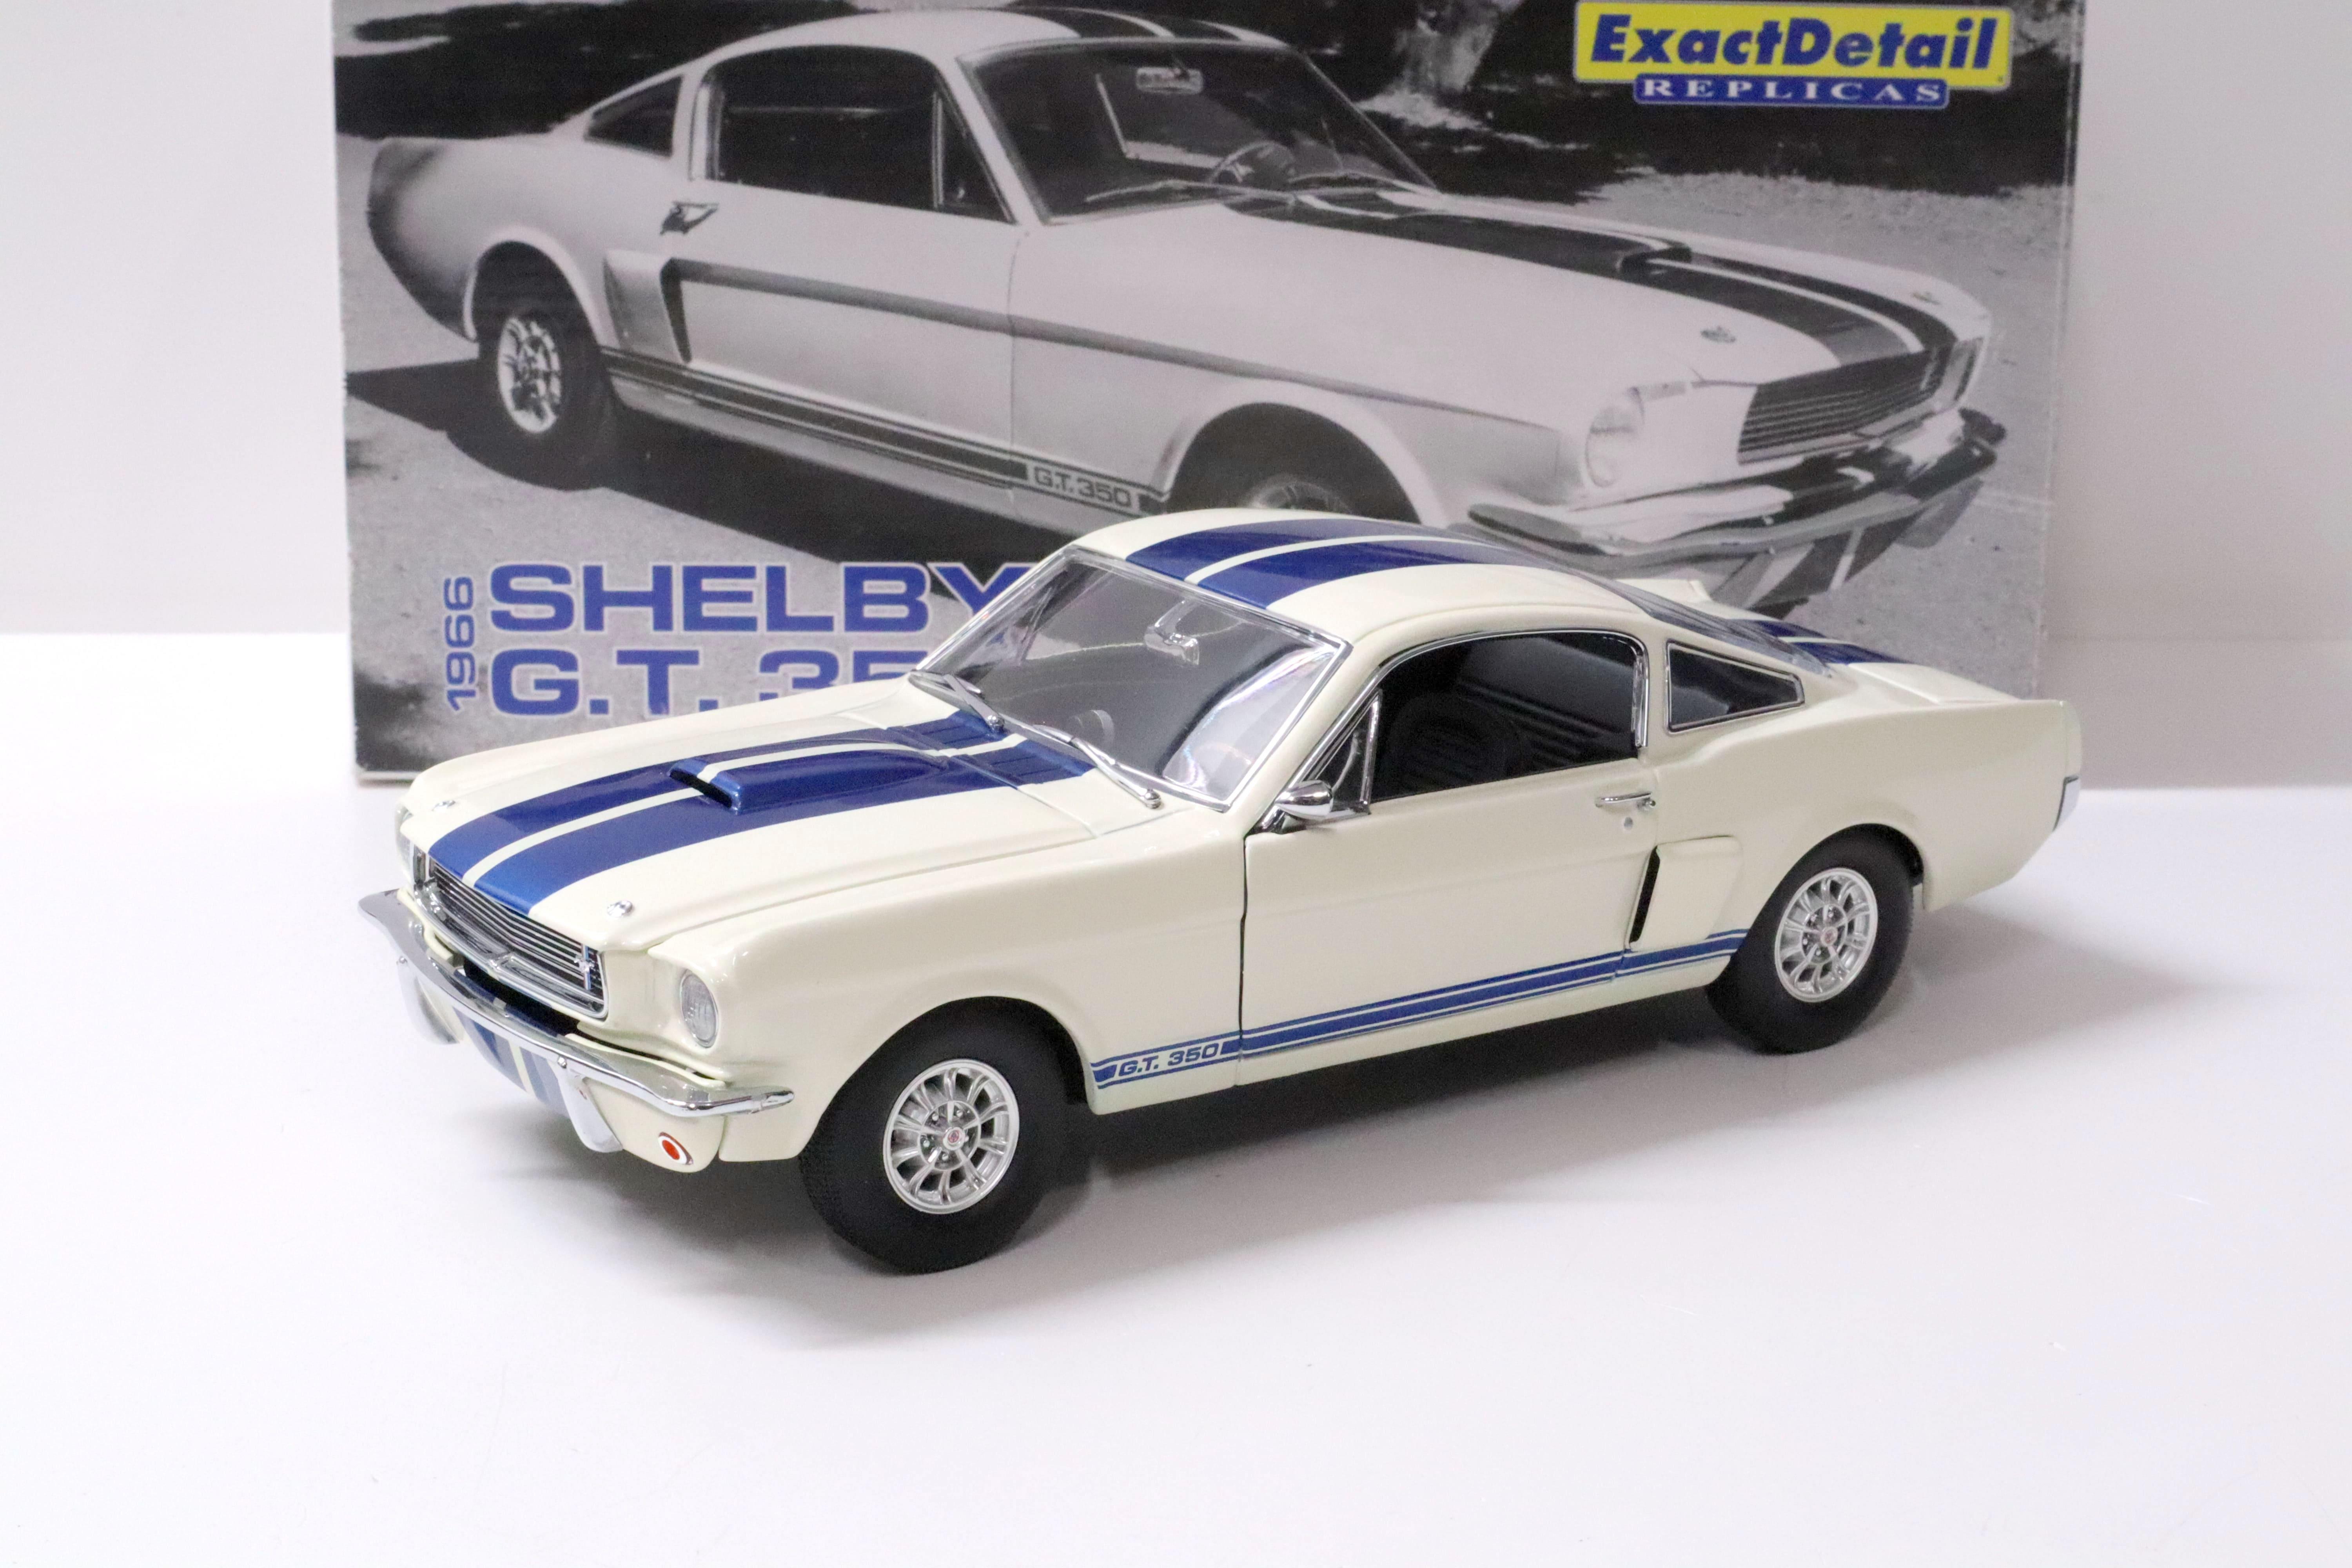 1:18 Exact Detail Shelby GT 350 Coupe 1966 white/ blue stripes